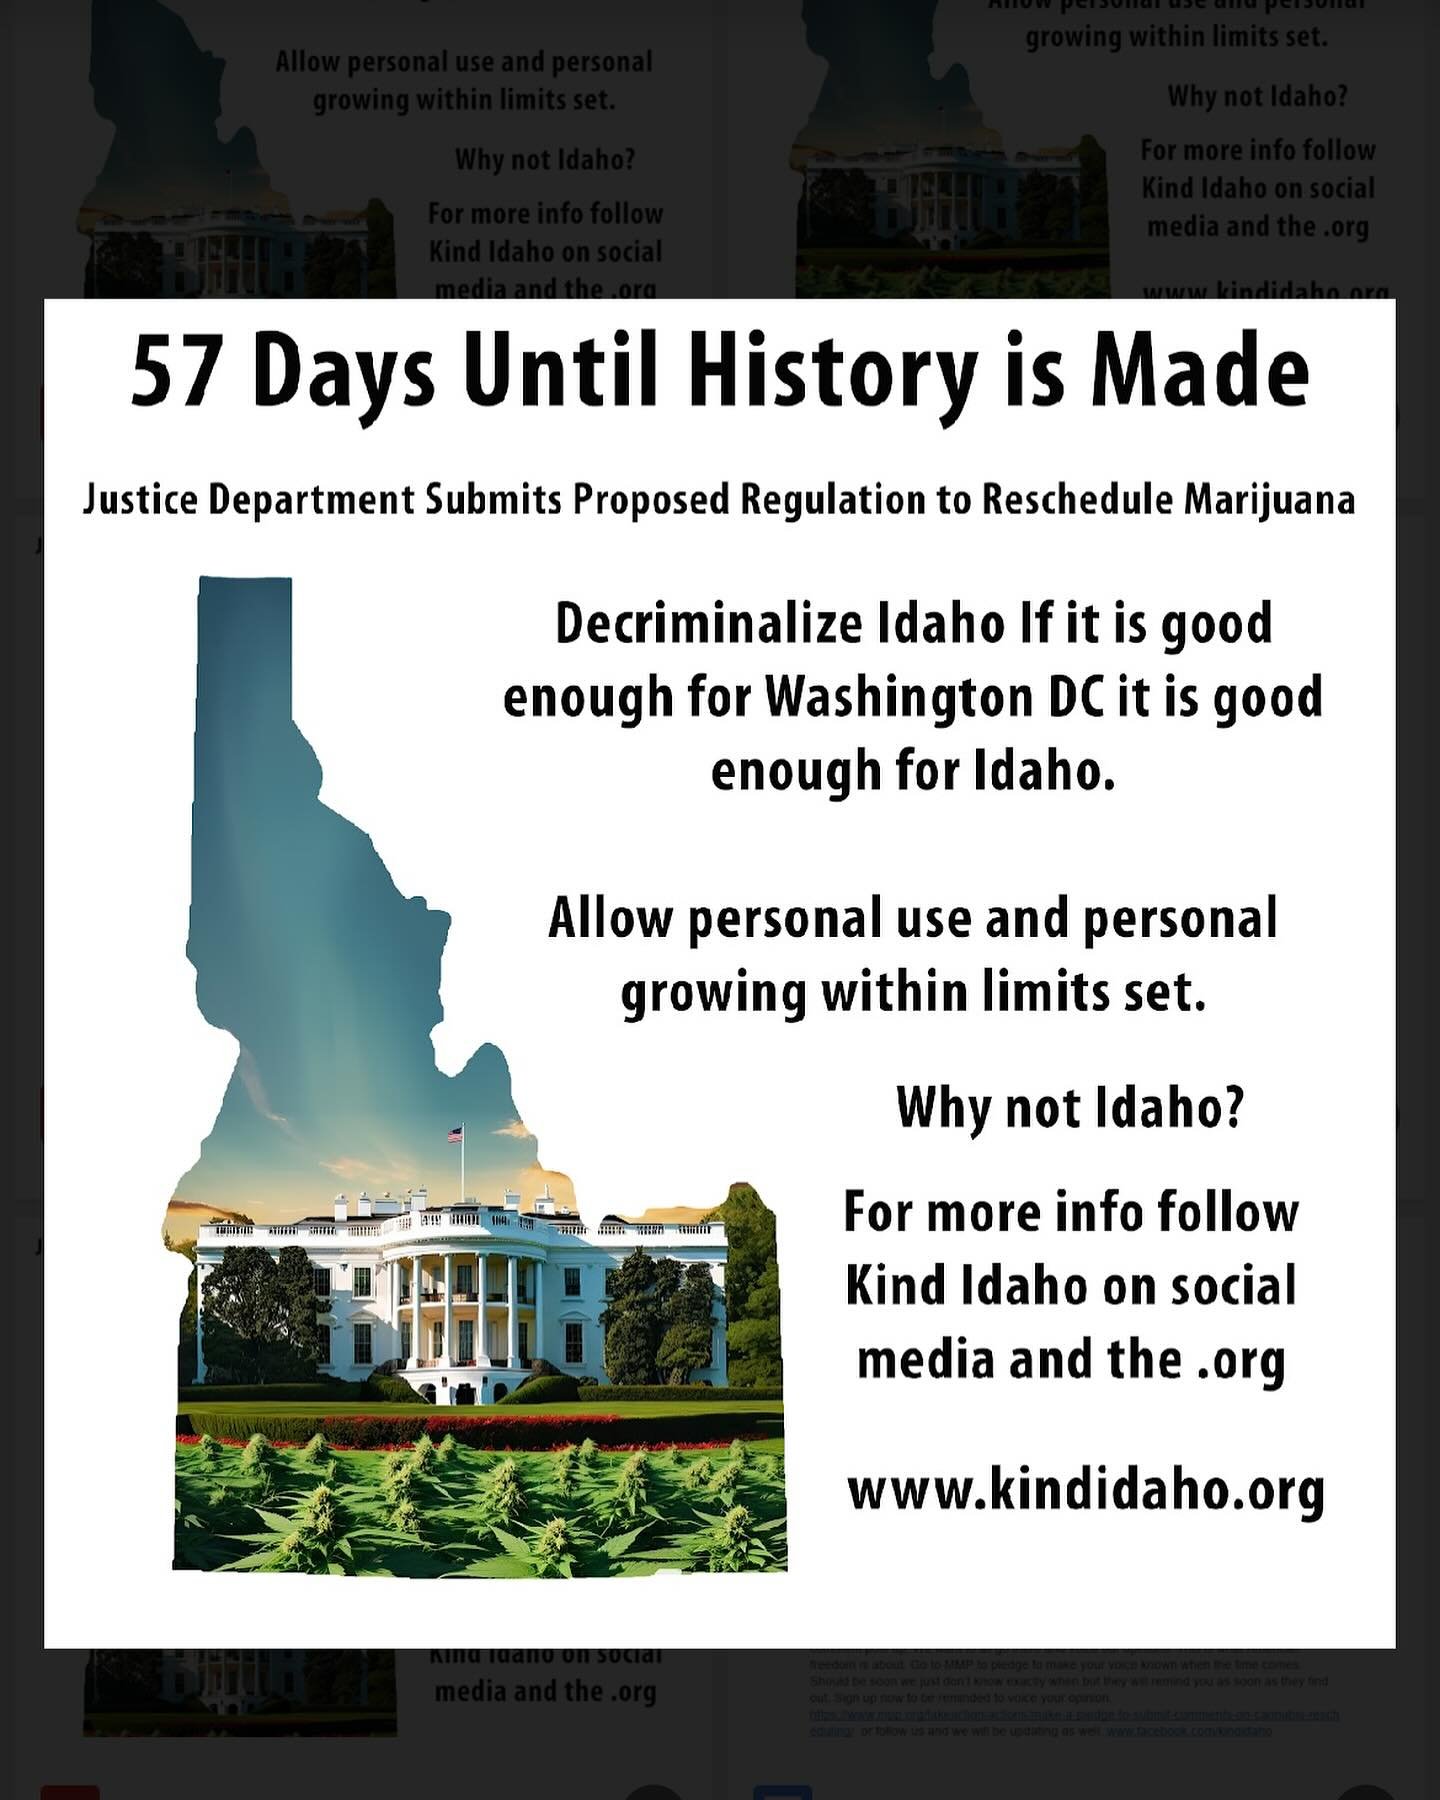 Estimated 57 days until we should get the rescheduling of cannabis federally from schedule 1 to schedule 3 and America finally acknowledges what most of the world has already accepted. Cannabis is a safe substance with healthful benefits. 
Idaho is v